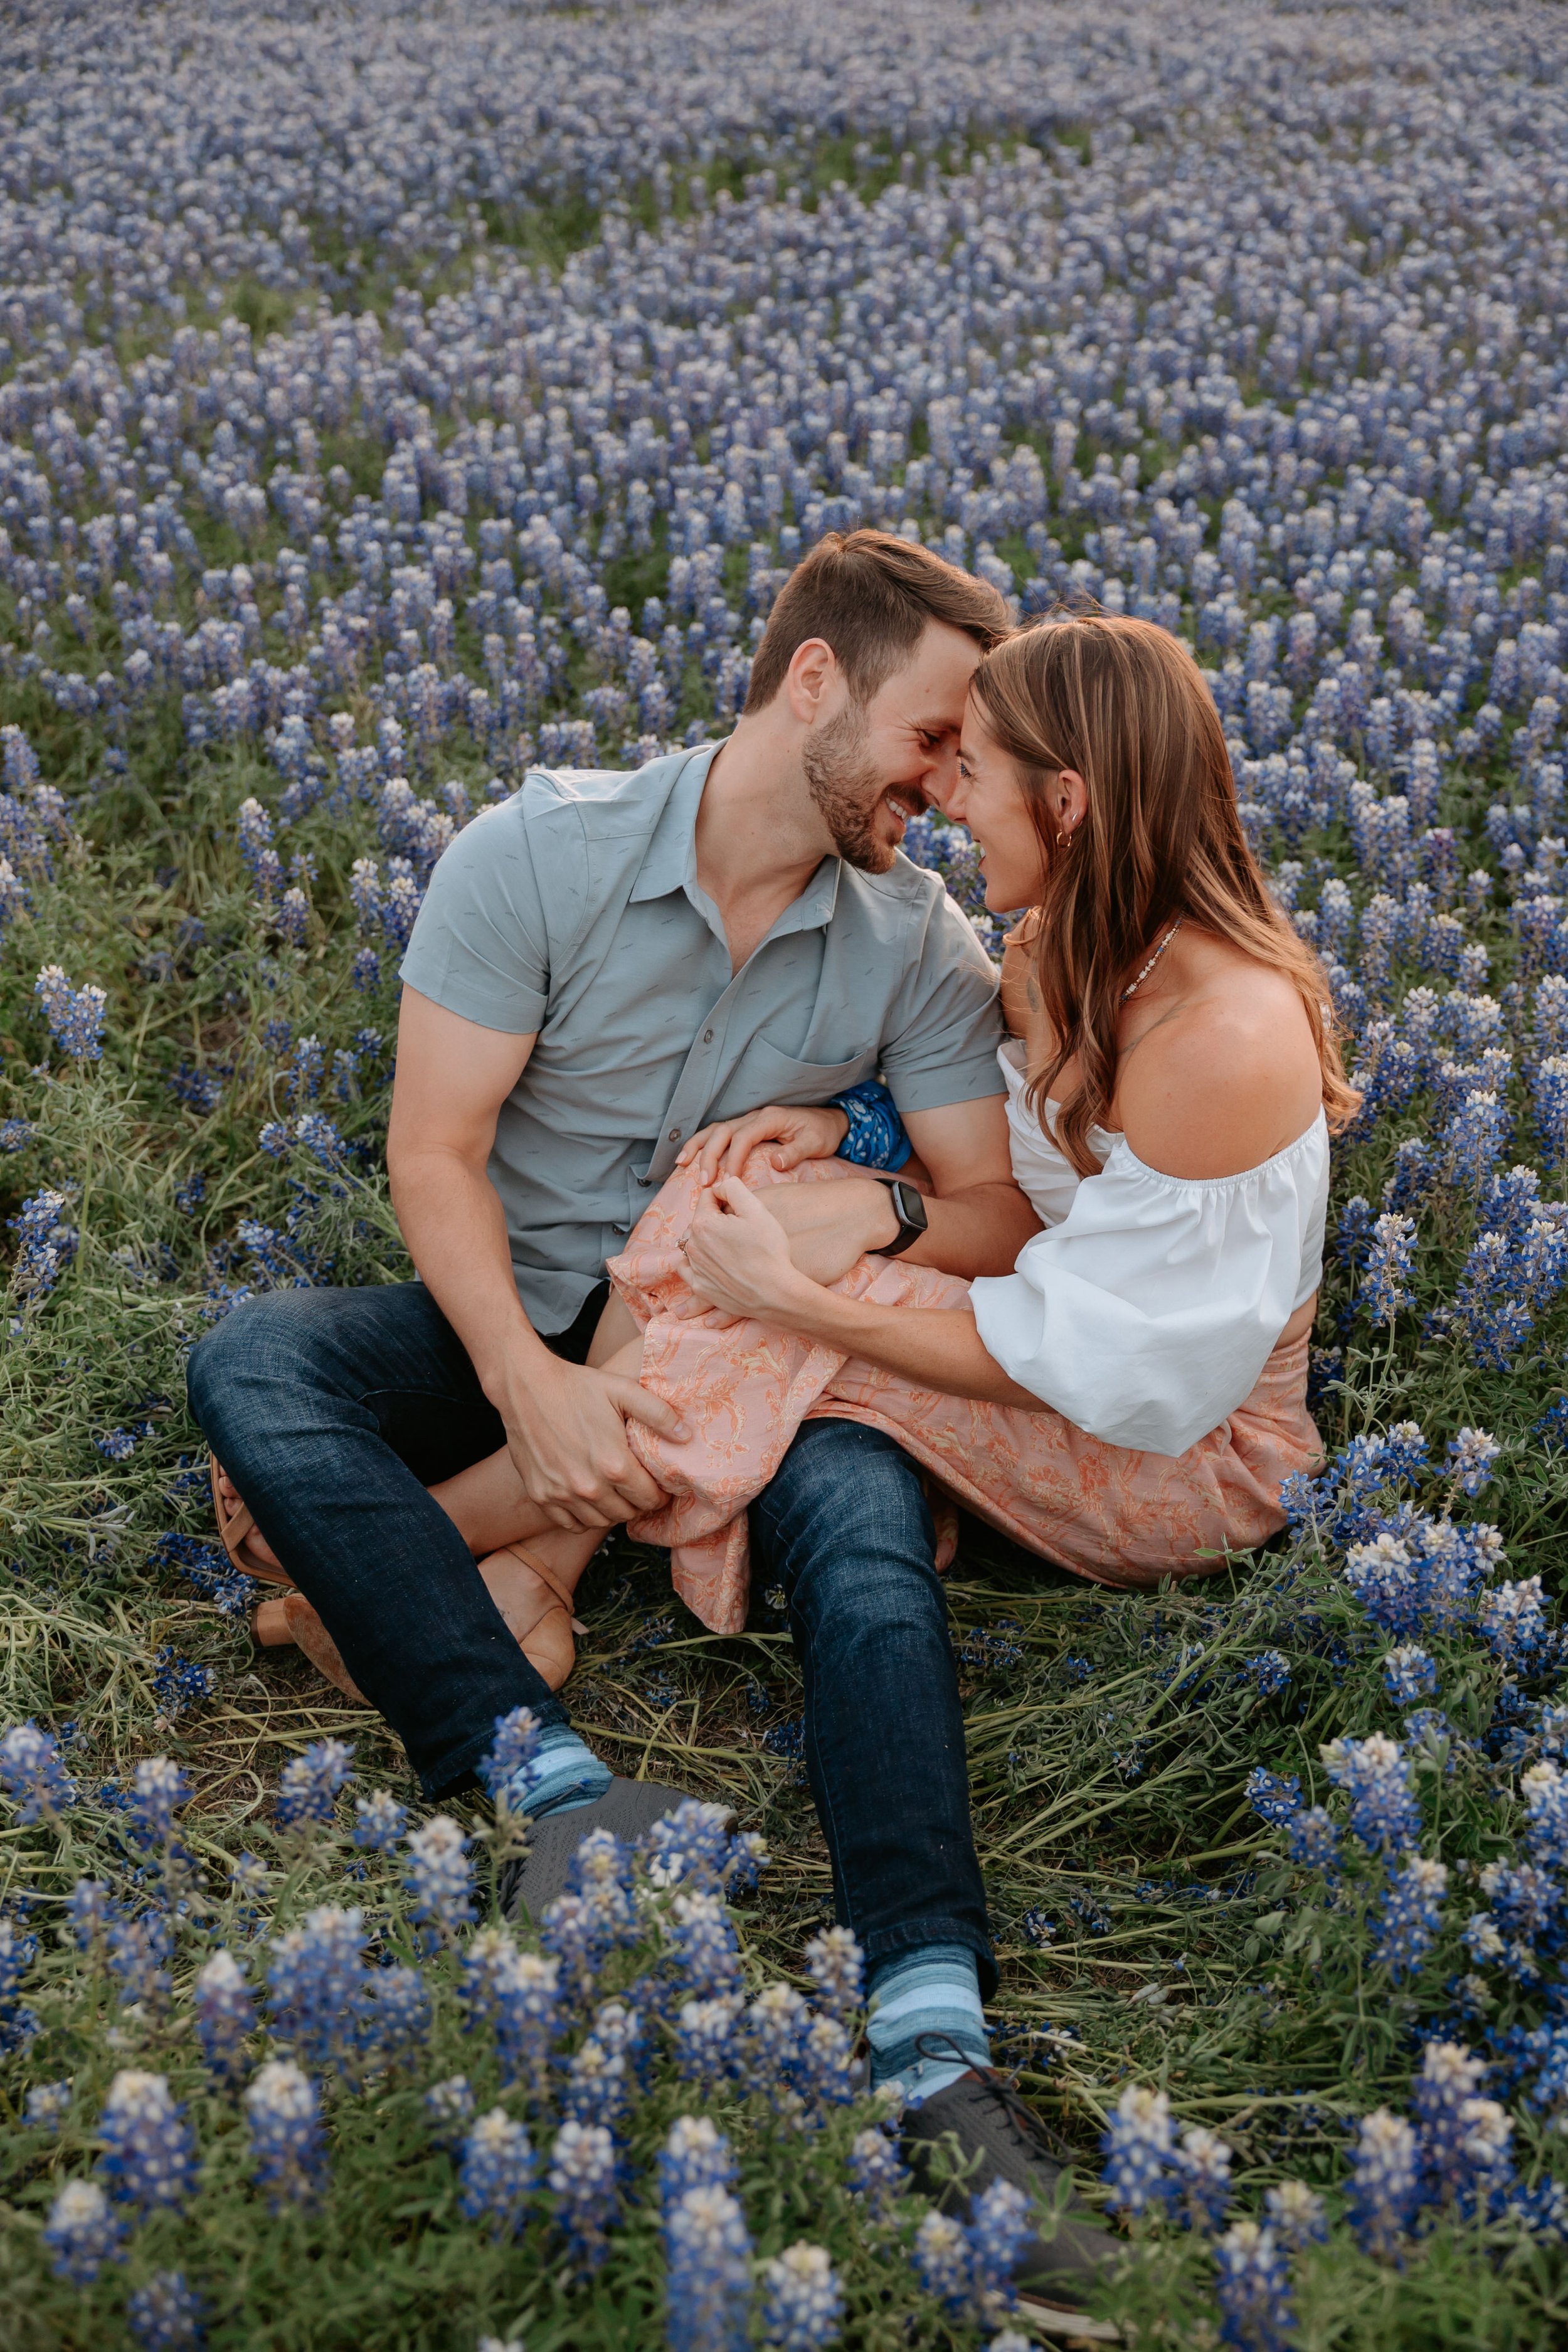 Man and woman sit a field of blue flowers.